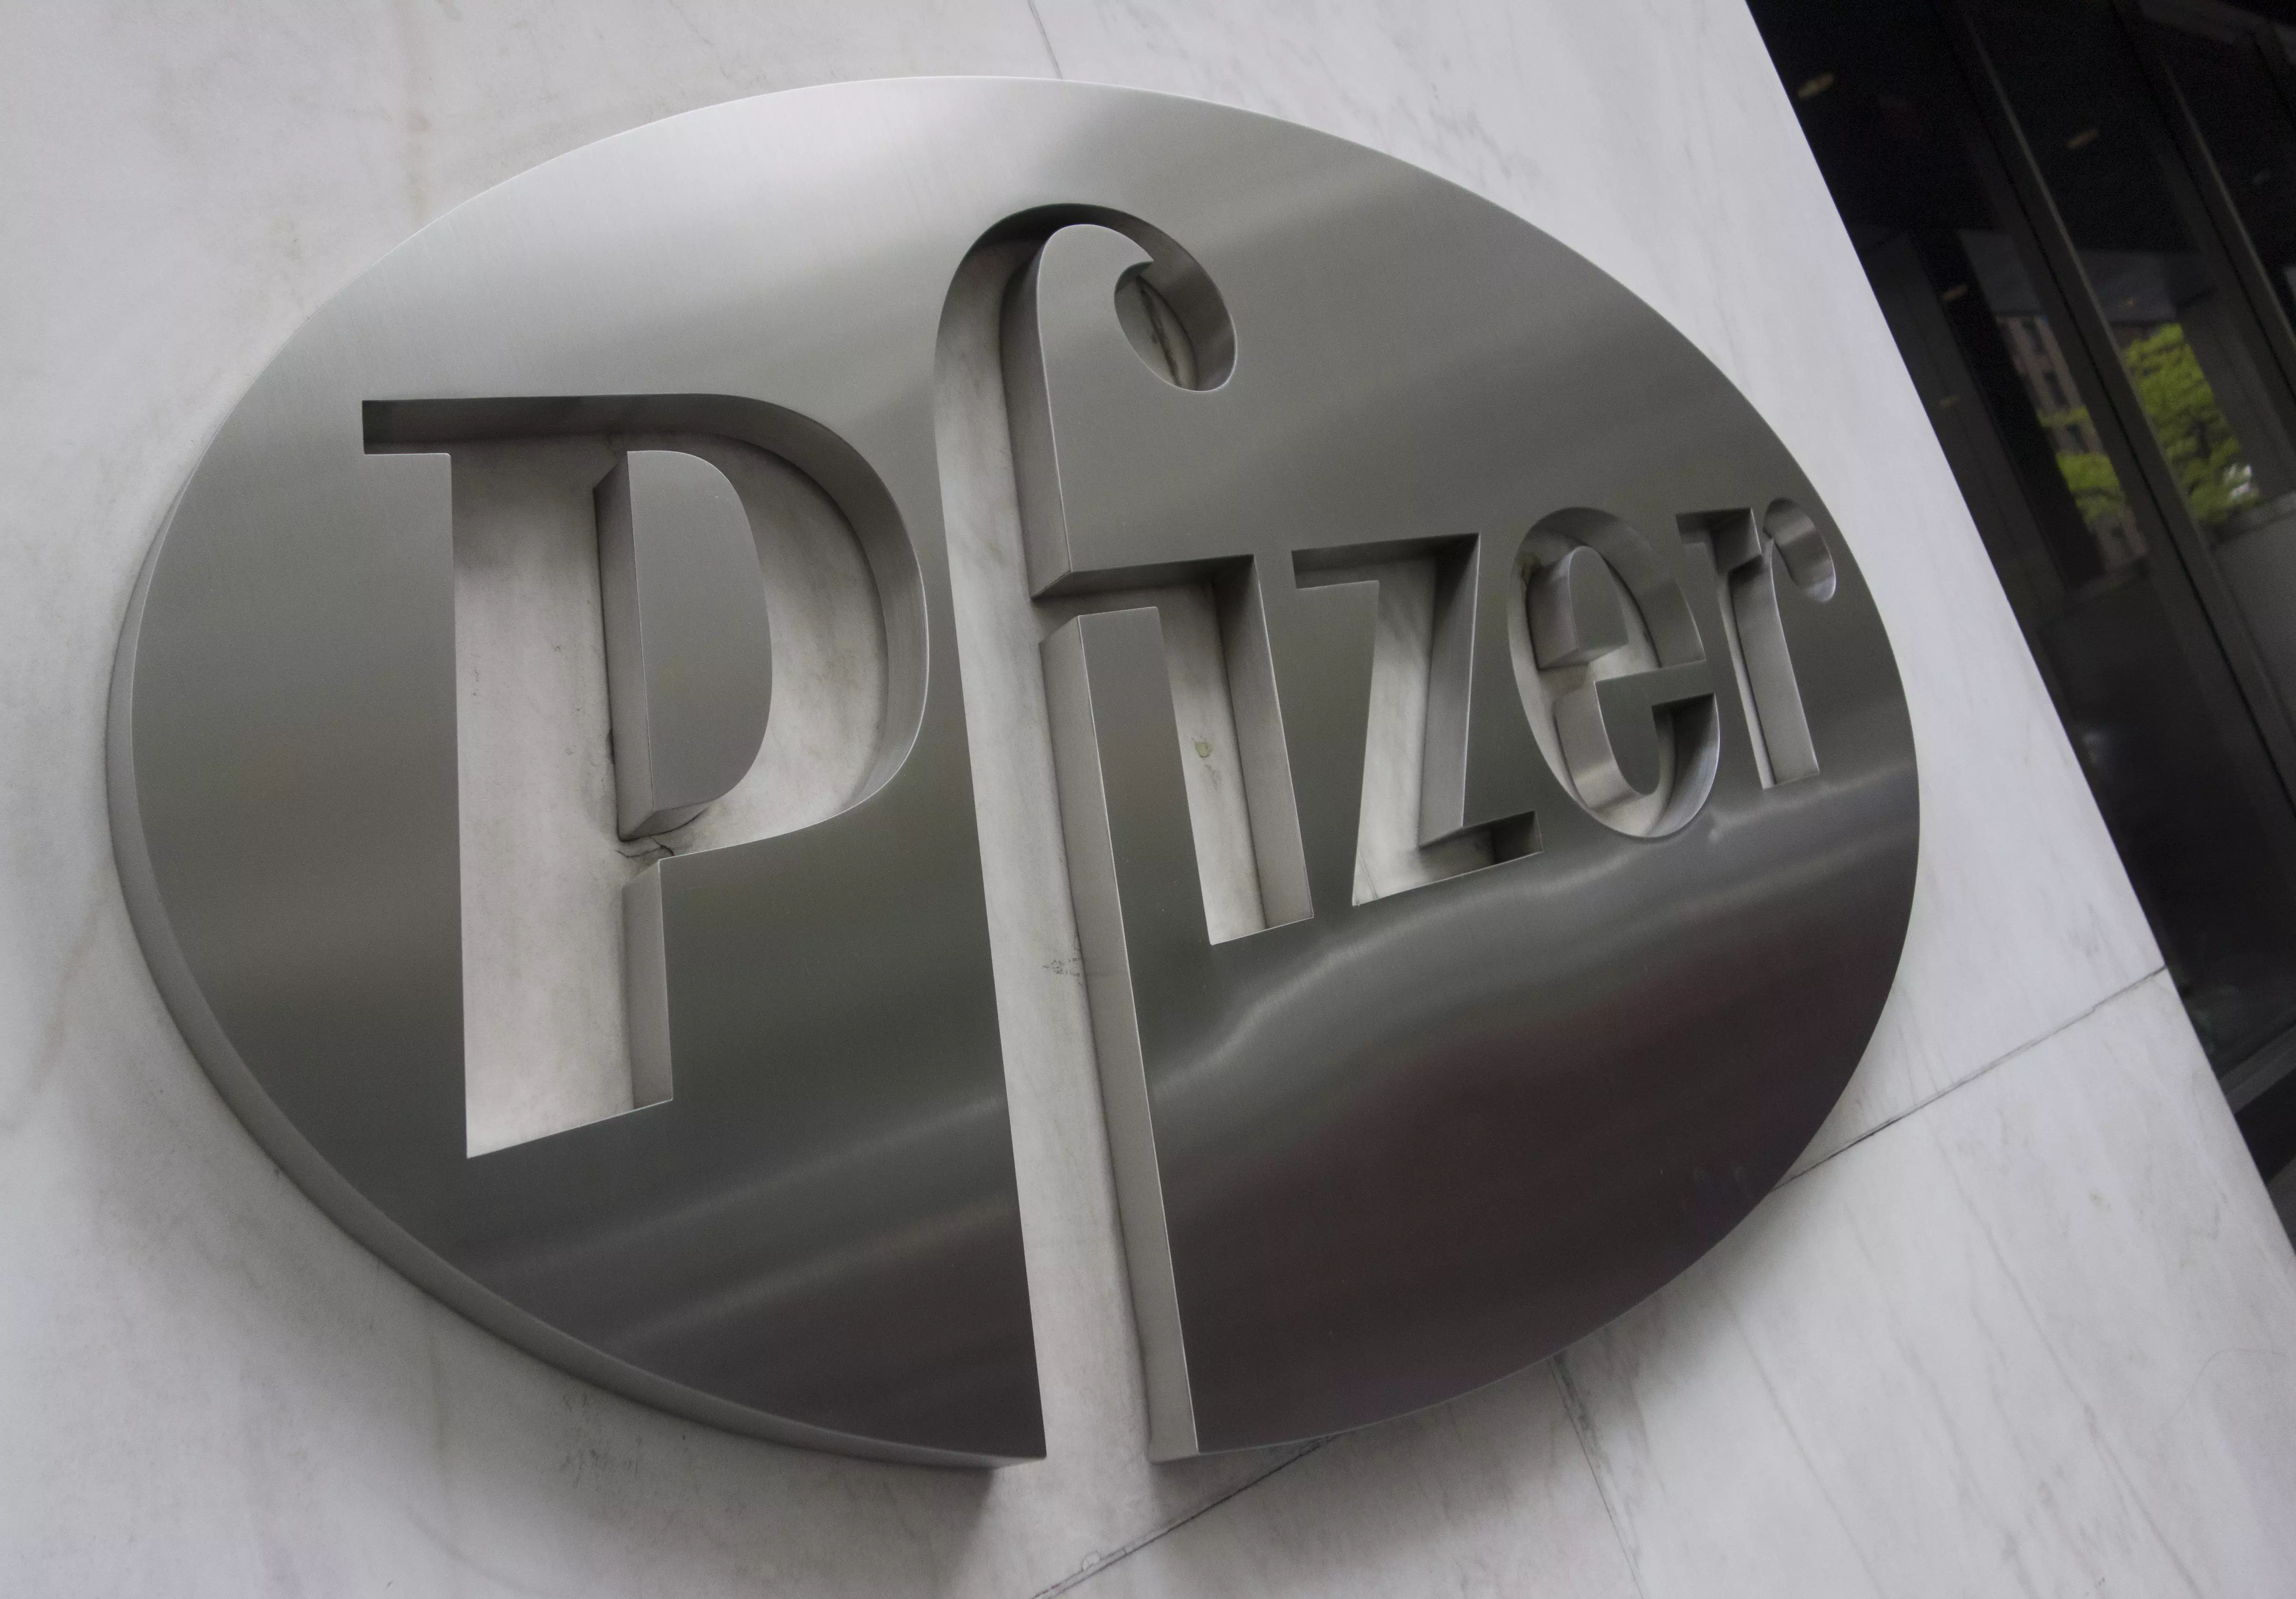 Pfizer Drug To Treat Covid-19 Vaccine Side Effect? Fake Claim Goes Viral